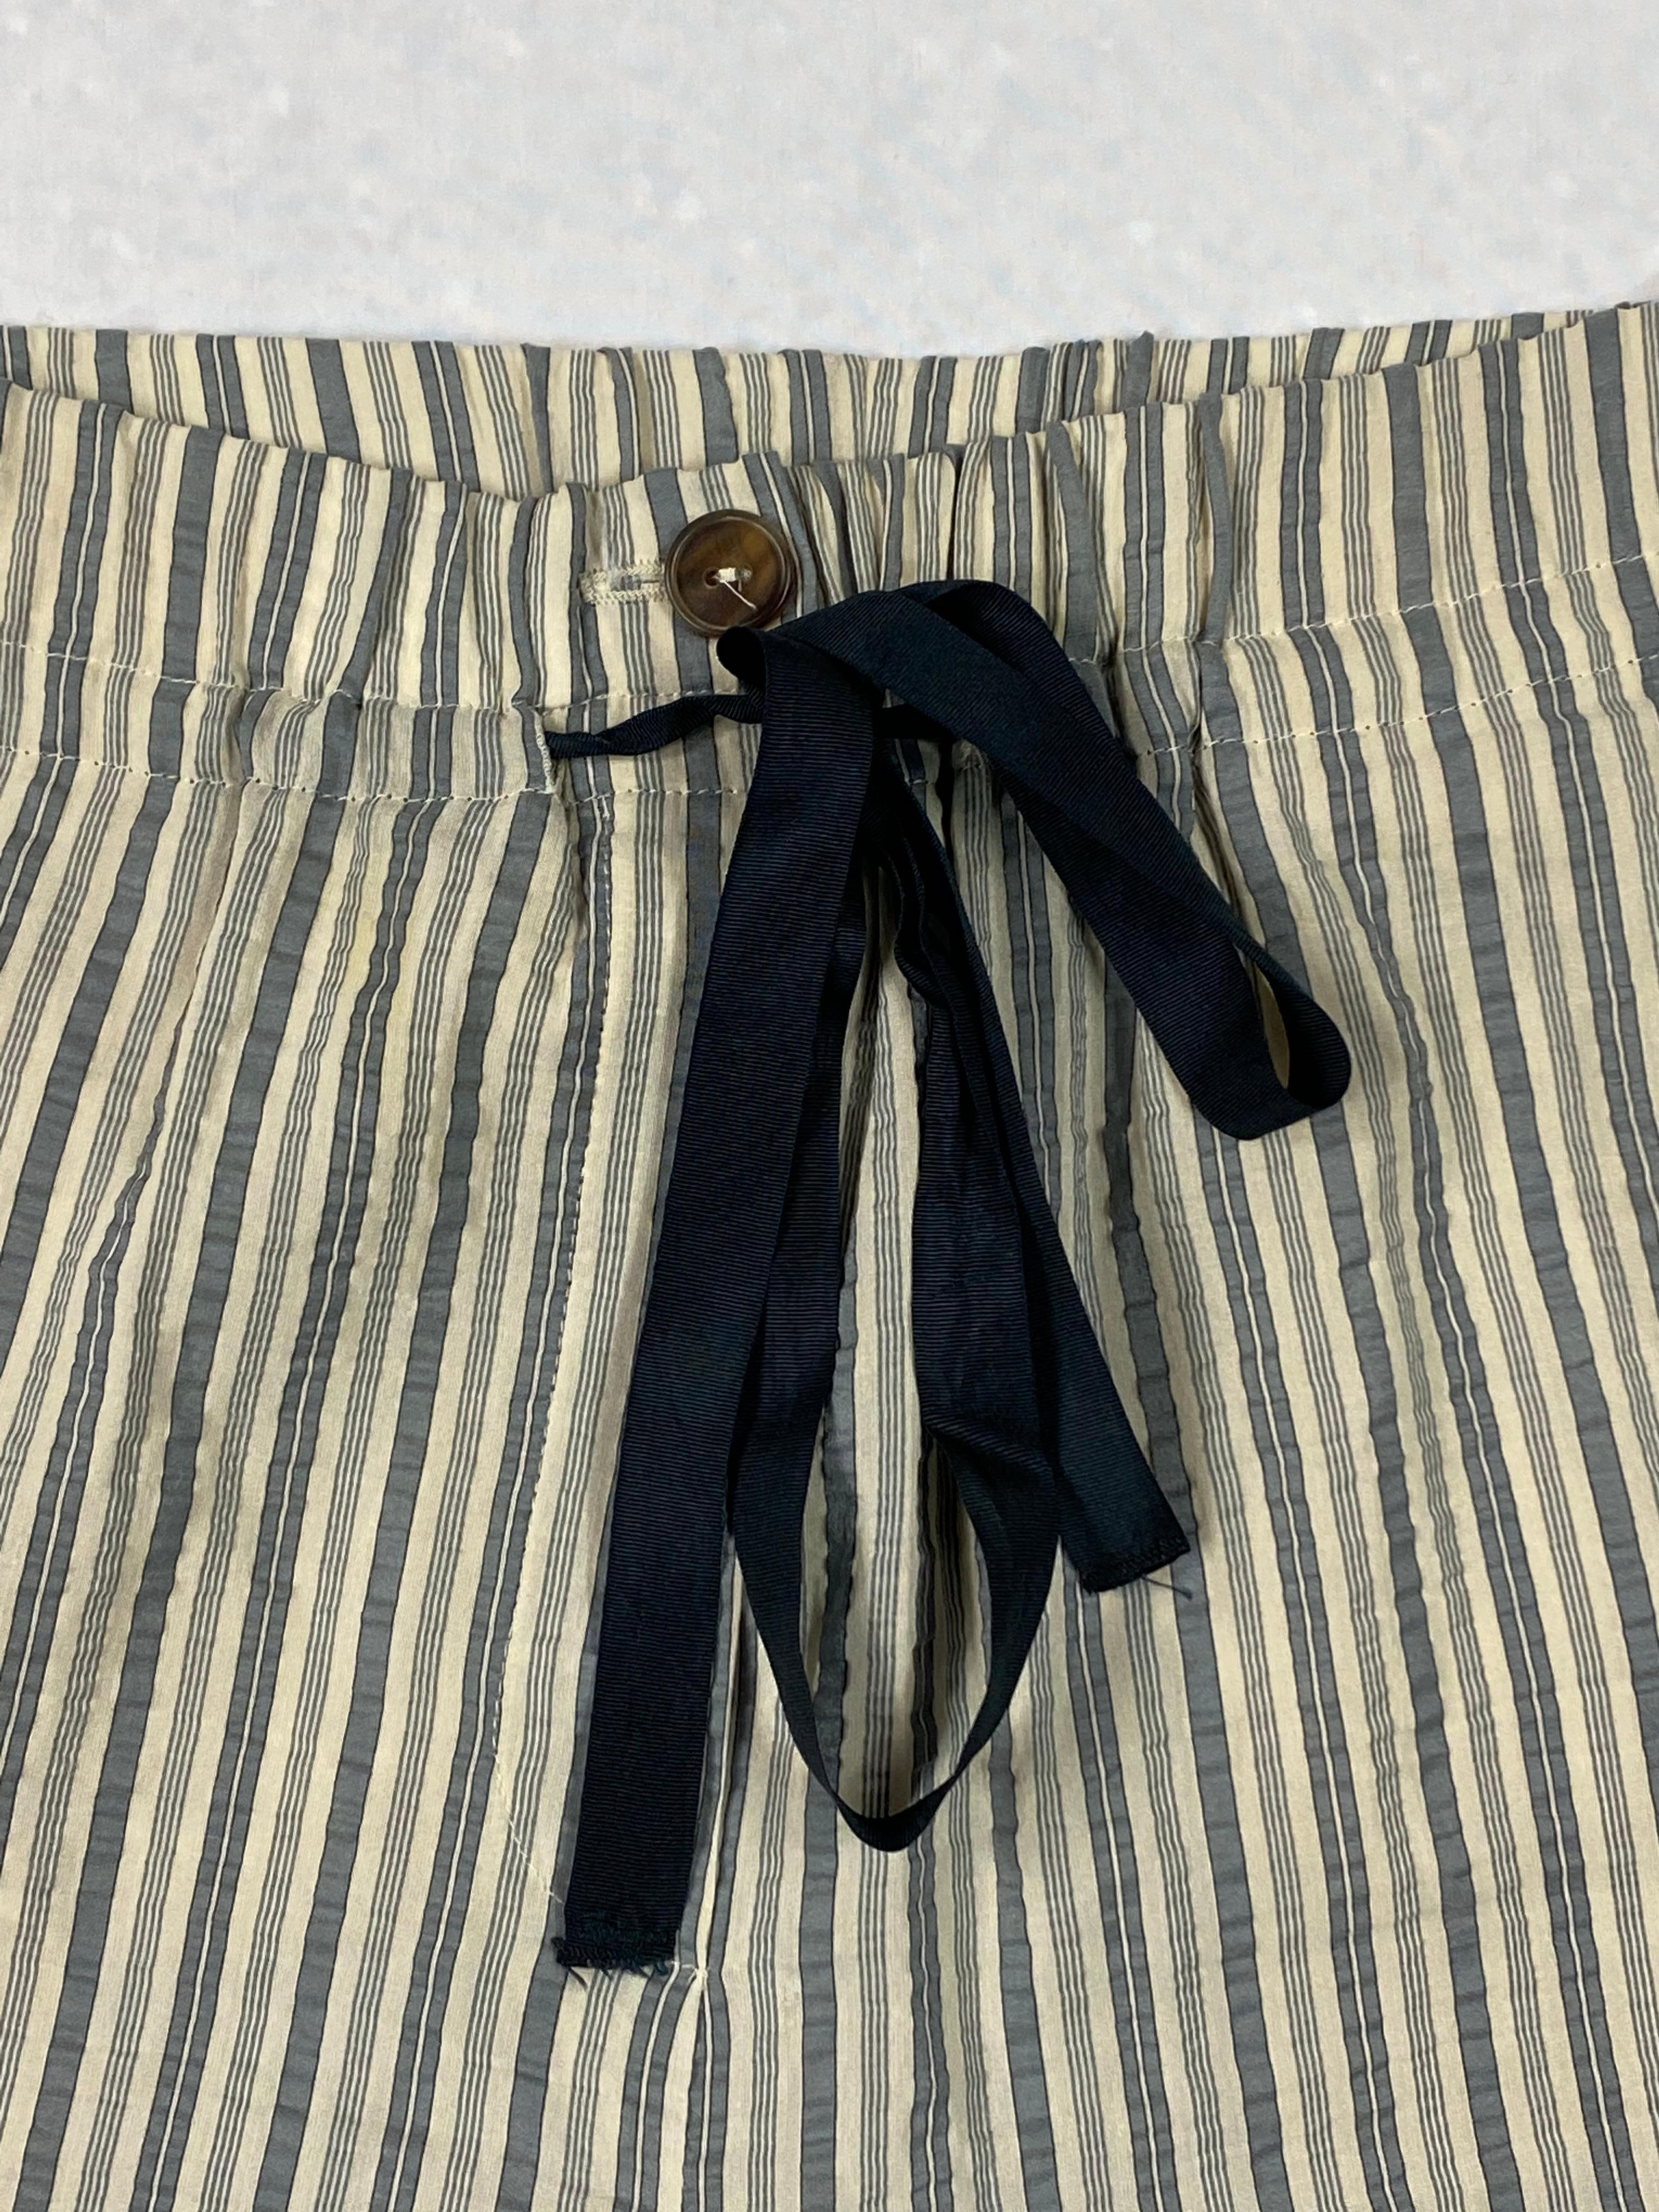 Product details:

The pants feature straight fit, very lightweight fabric with vertical striped pattern, front bow ribbon detail. Made in Italy.

